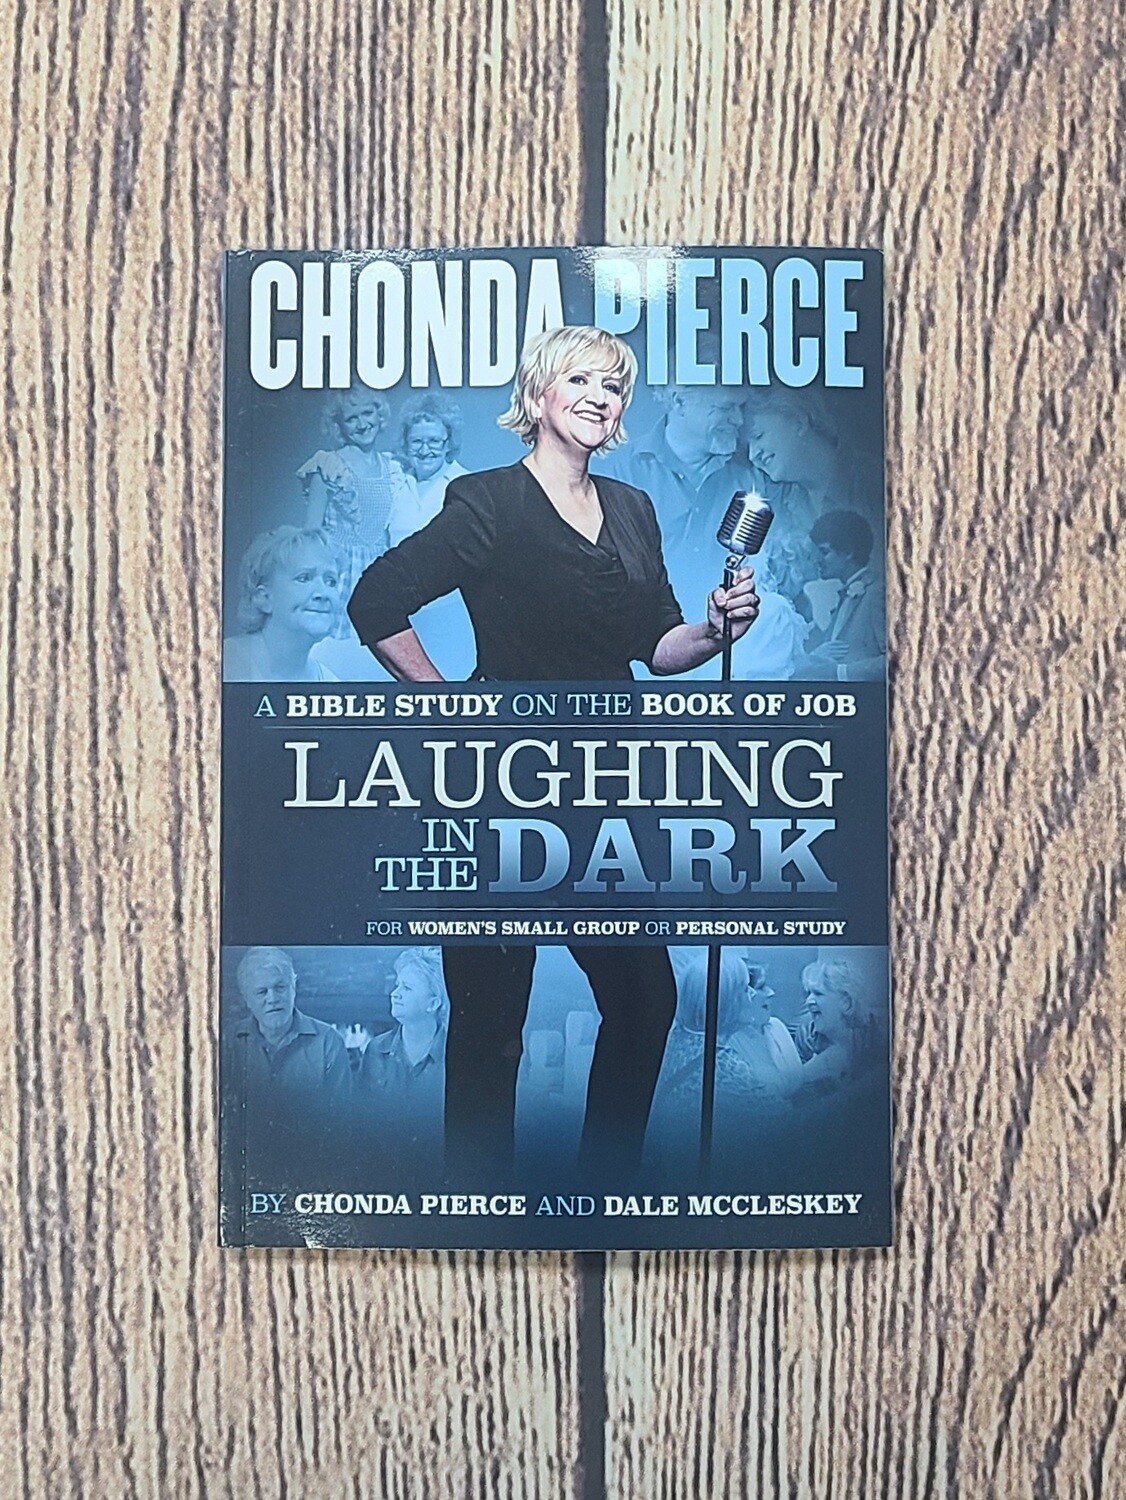 Laughing in the Dark: A Bible Study on the Book of Job by Chonda Pierce and Dale McCleskey